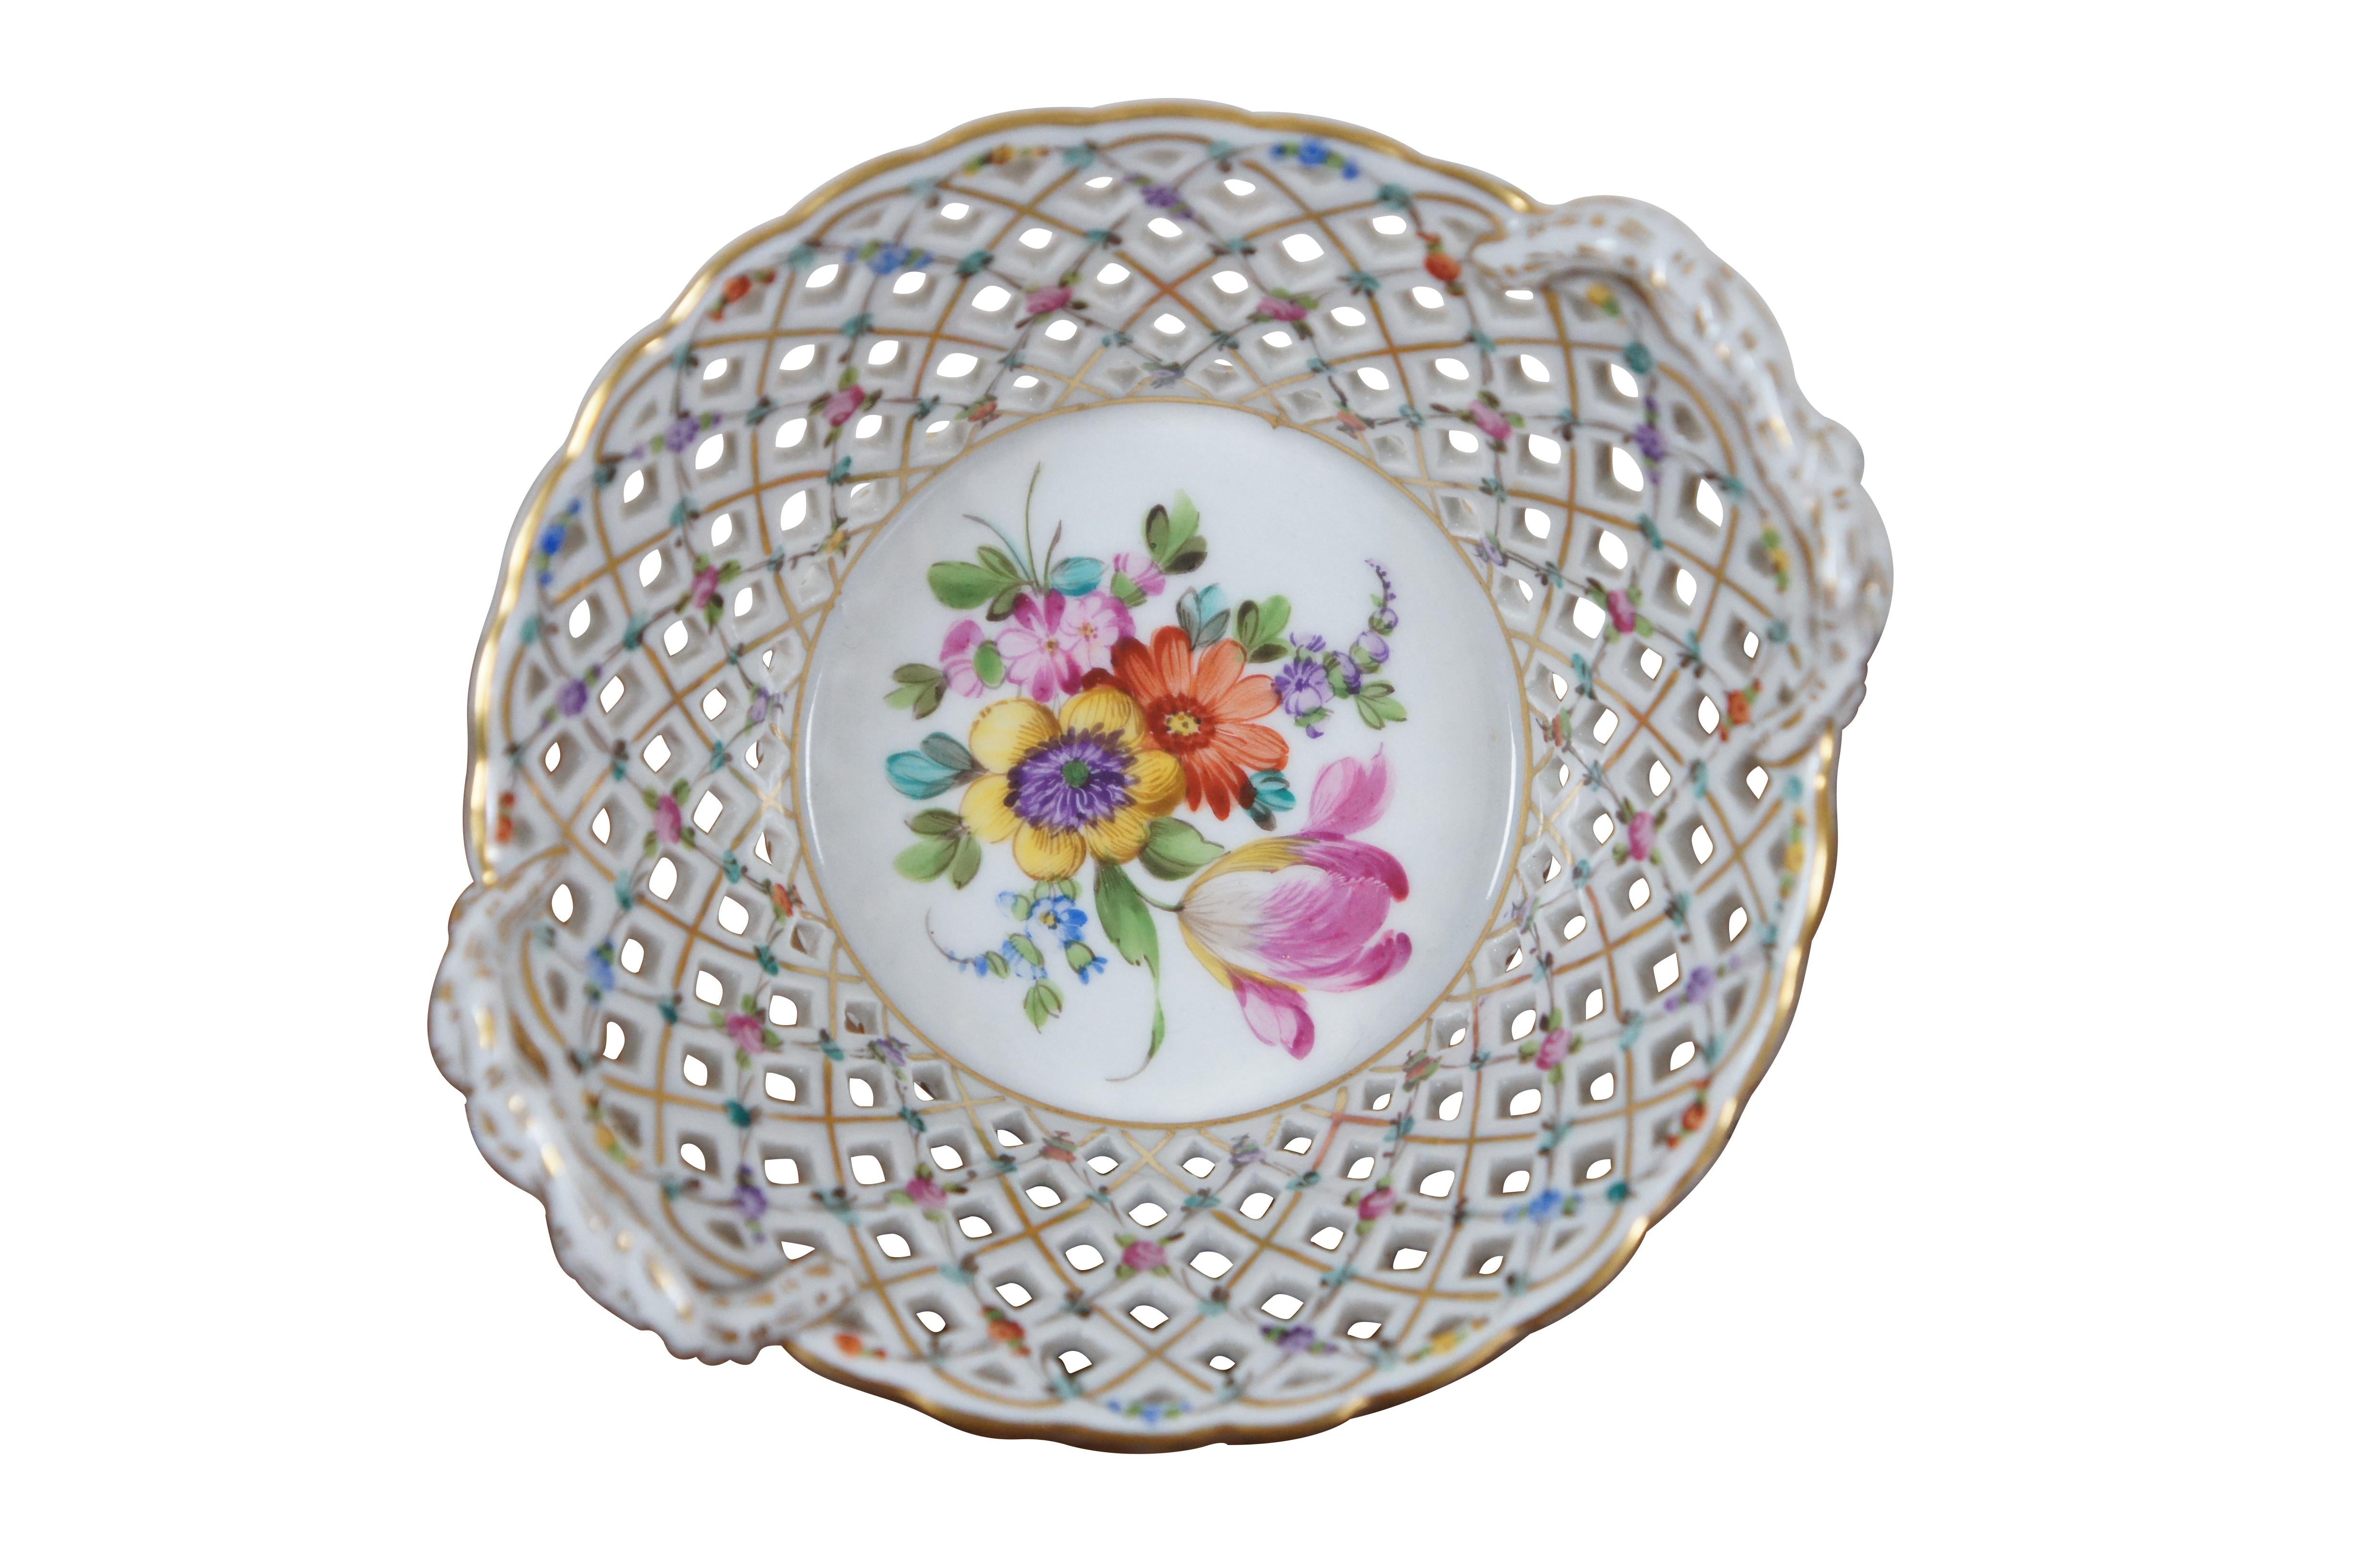 An exceptional Dresden basket weave hand painted bob bon dish or bowl.  Polychrome with colorful floral sprays and flowers throughout.

“The Sächsische Porzellan-Manufaktur Dresden GmbH (Saxon Porcelain Manufactory in Dresden Ltd), generally known